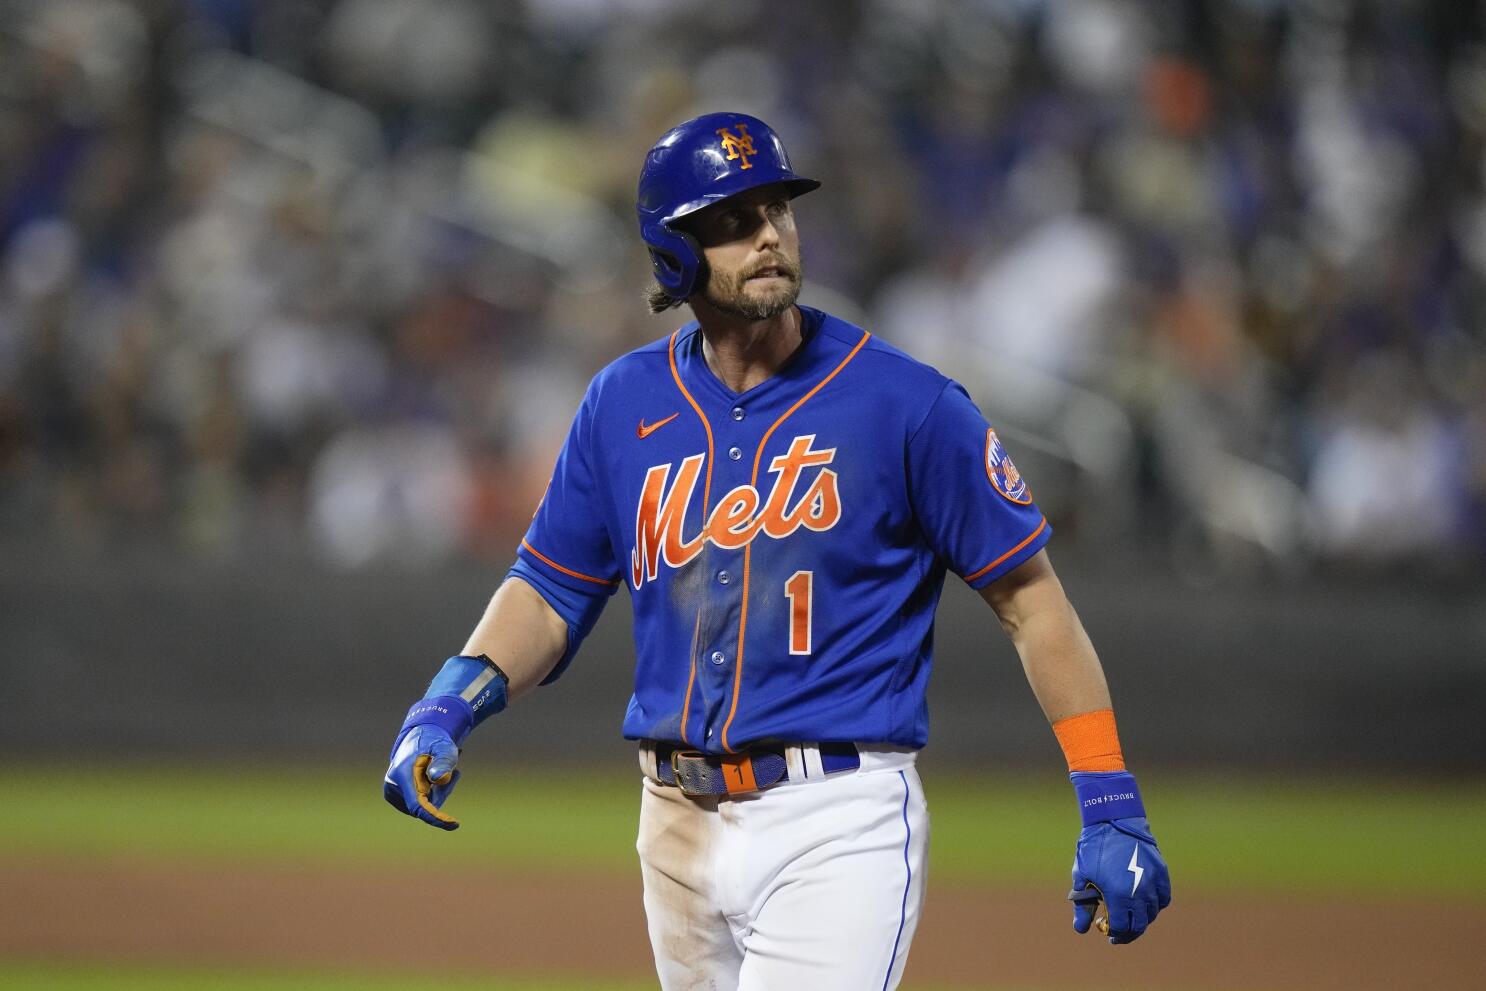 Mets fall season-high 9 games under .500, lose to Brewers 3-2